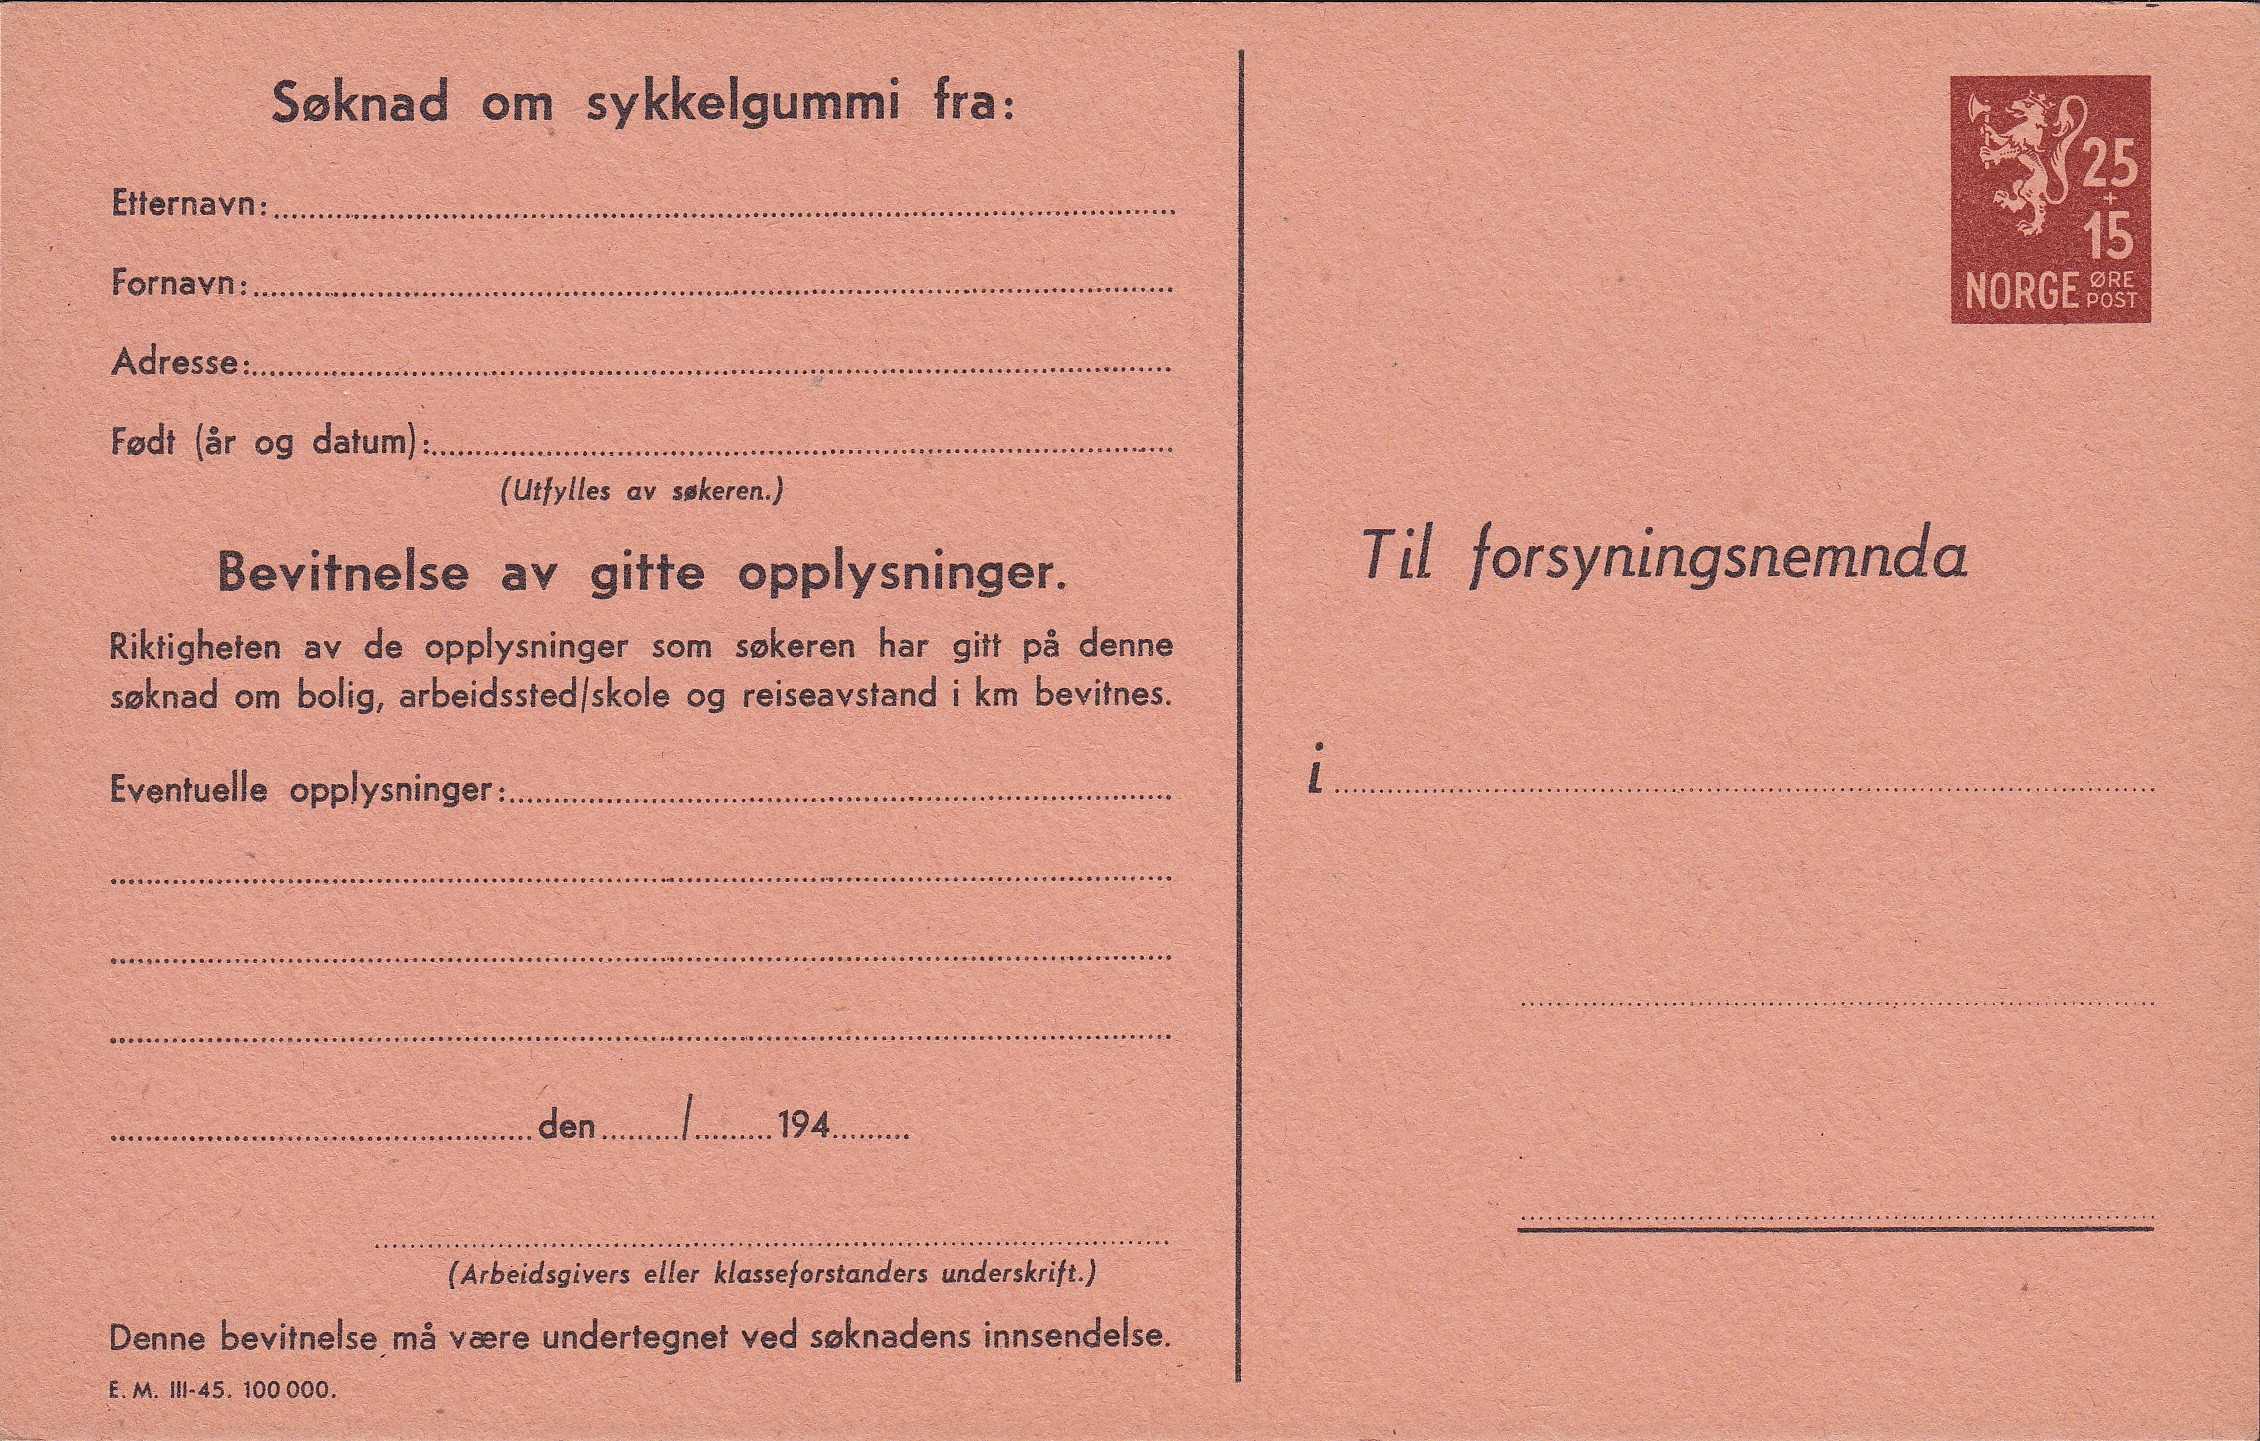 norway-wwii- soknad-sykkel-sample-postal-stationery-application-card-bicycle-stamps